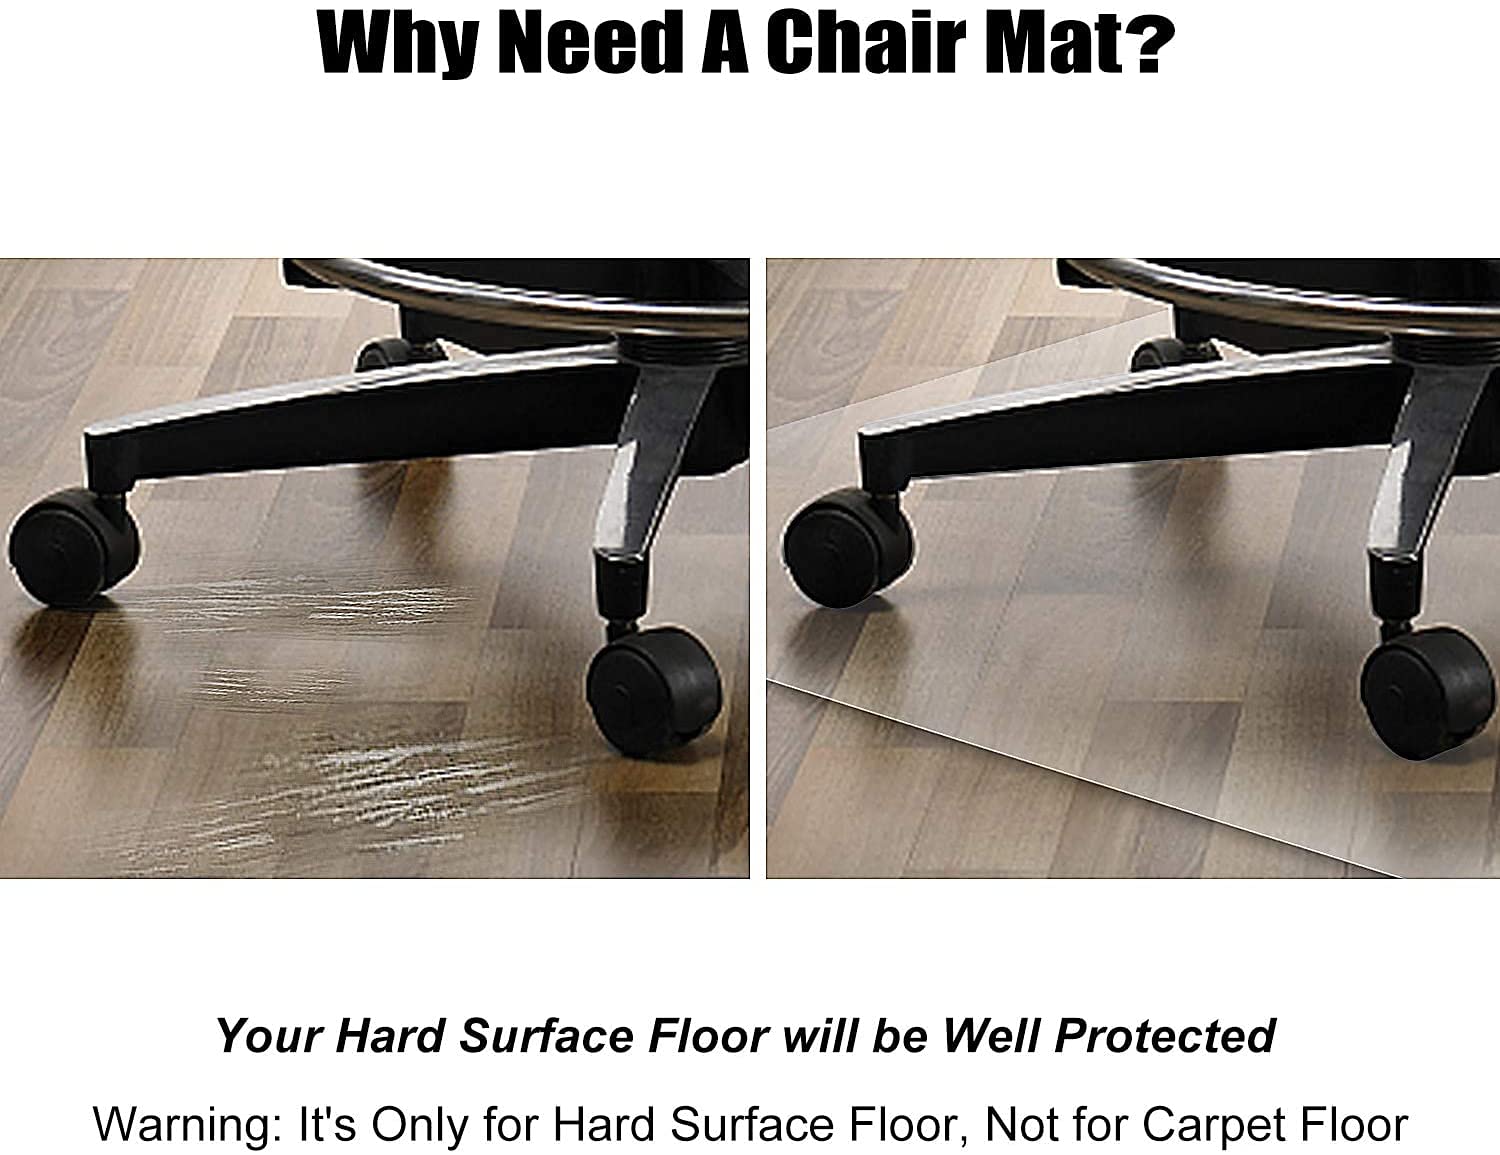 LeapYouth Large Office Chair Mat for Hardwood Floors - 48"×60" Anti-Slip Desk Chair Mat for Rolling Chairs - Heavy Duty Floor Protector for Home Office - Easy Clean and Flat Without Curling